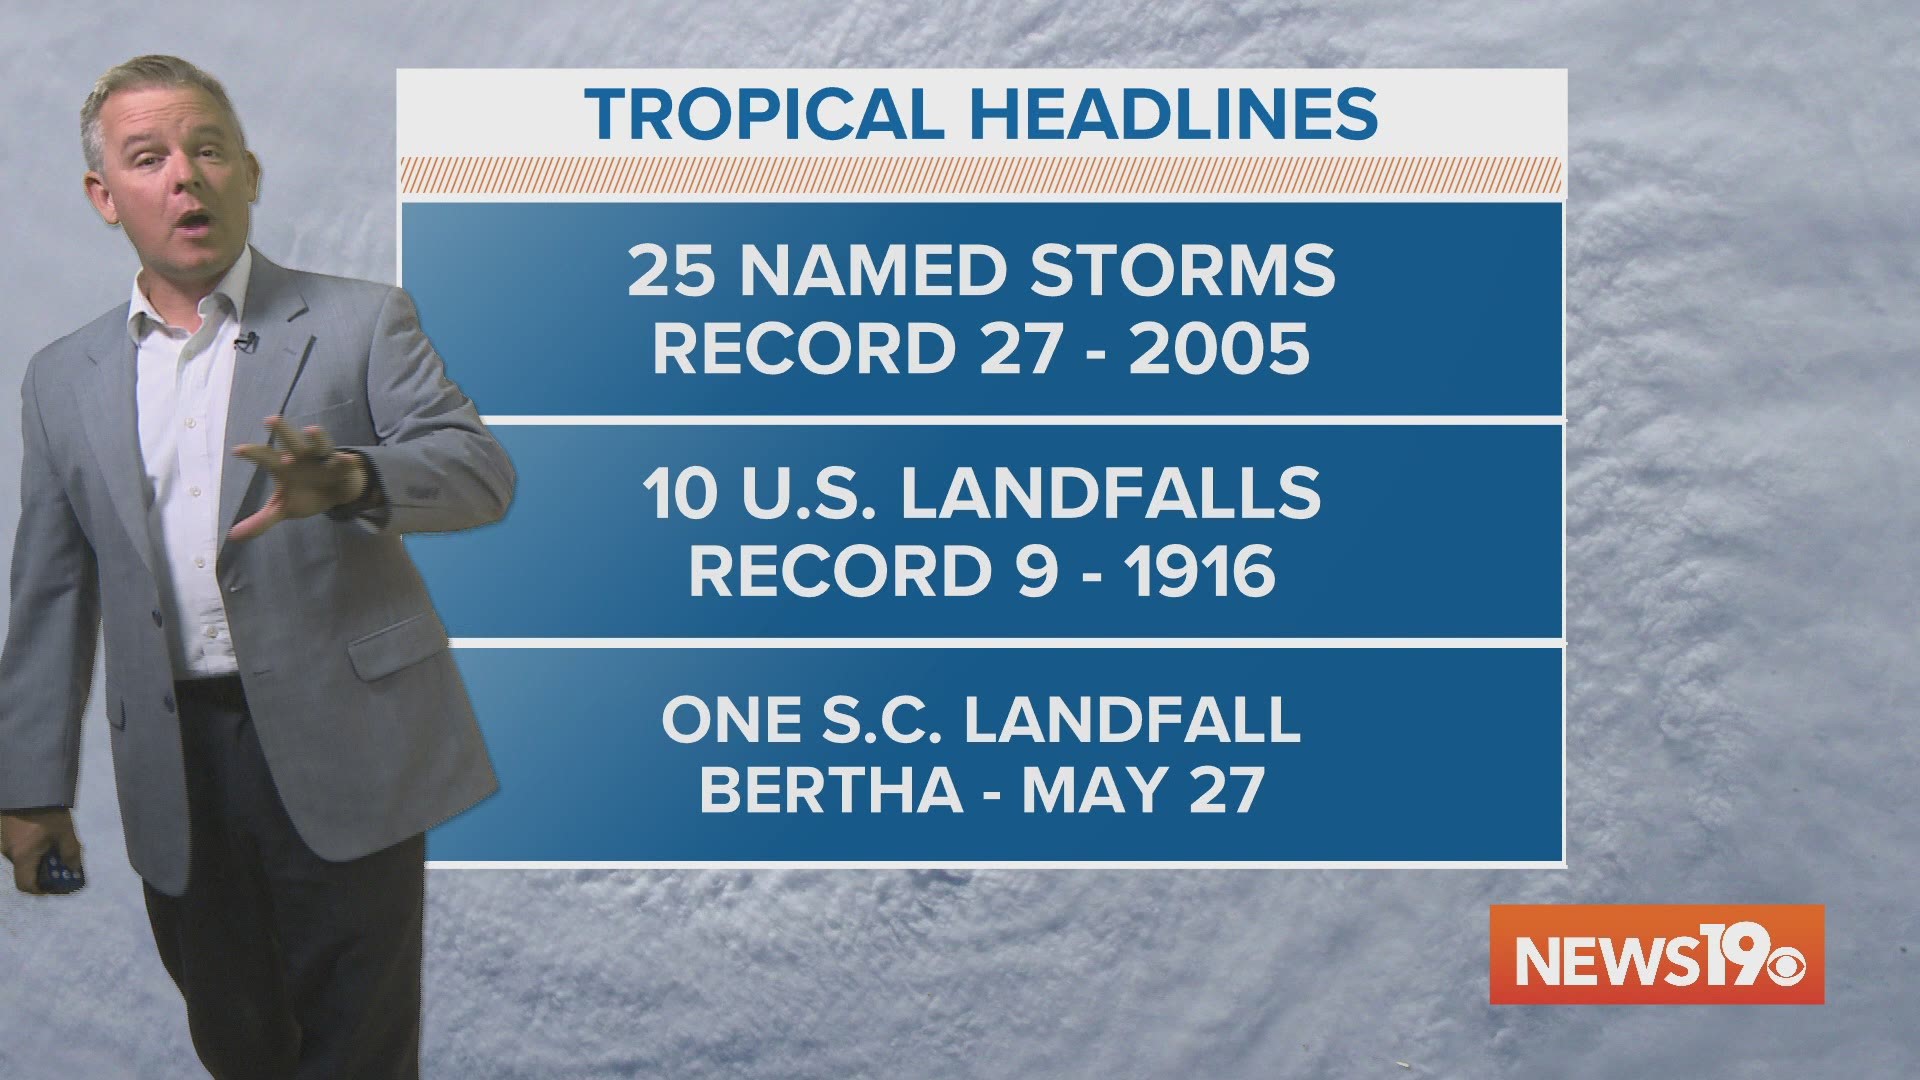 There have 25 named storms so far, the record is 27 set in 2005.